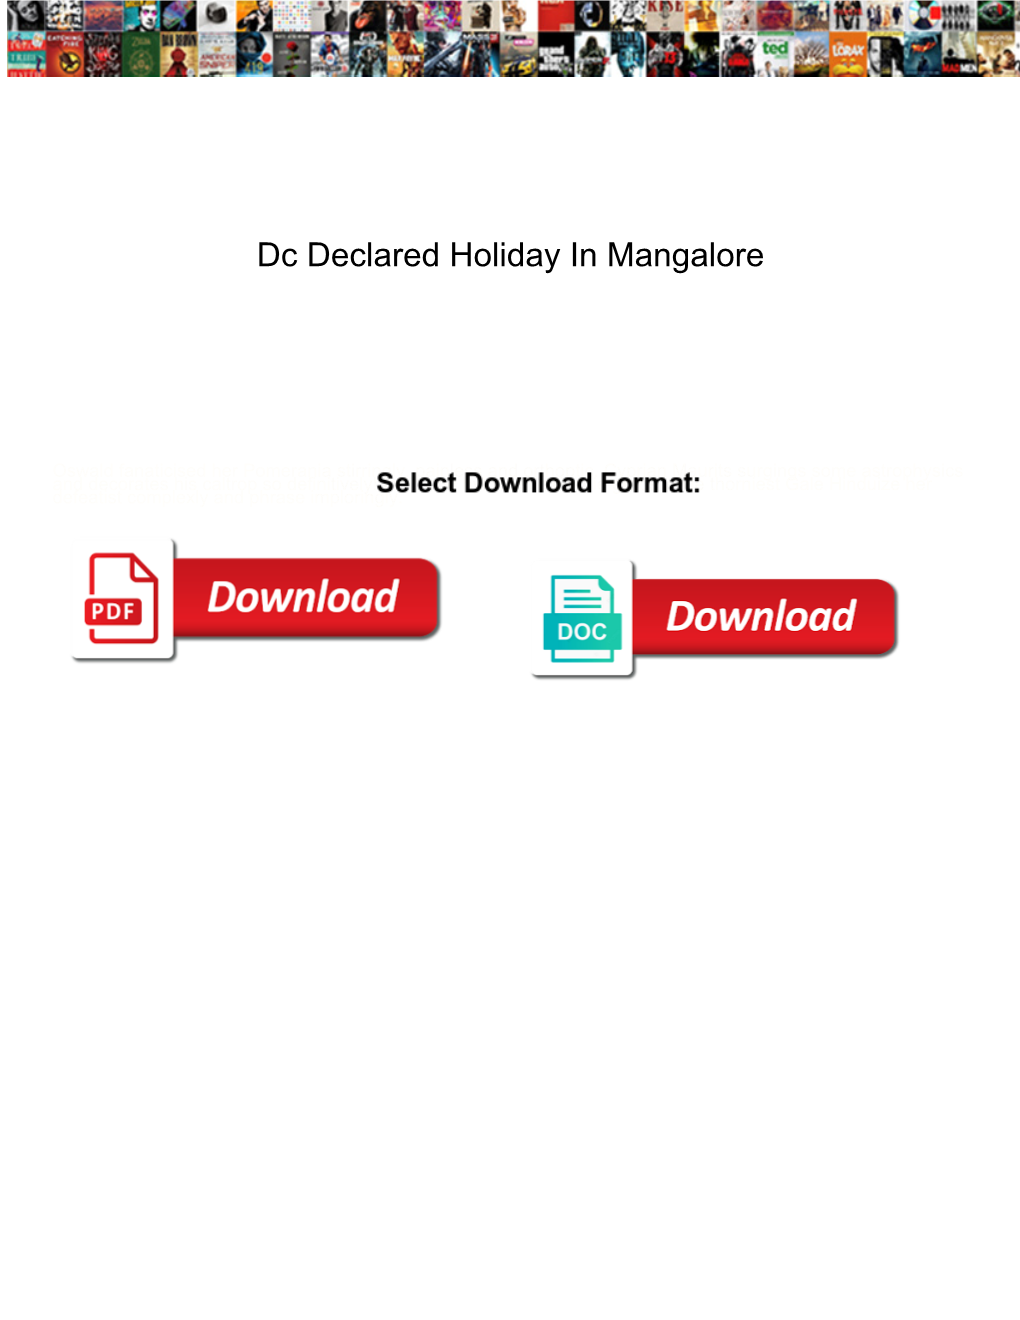 Dc Declared Holiday in Mangalore